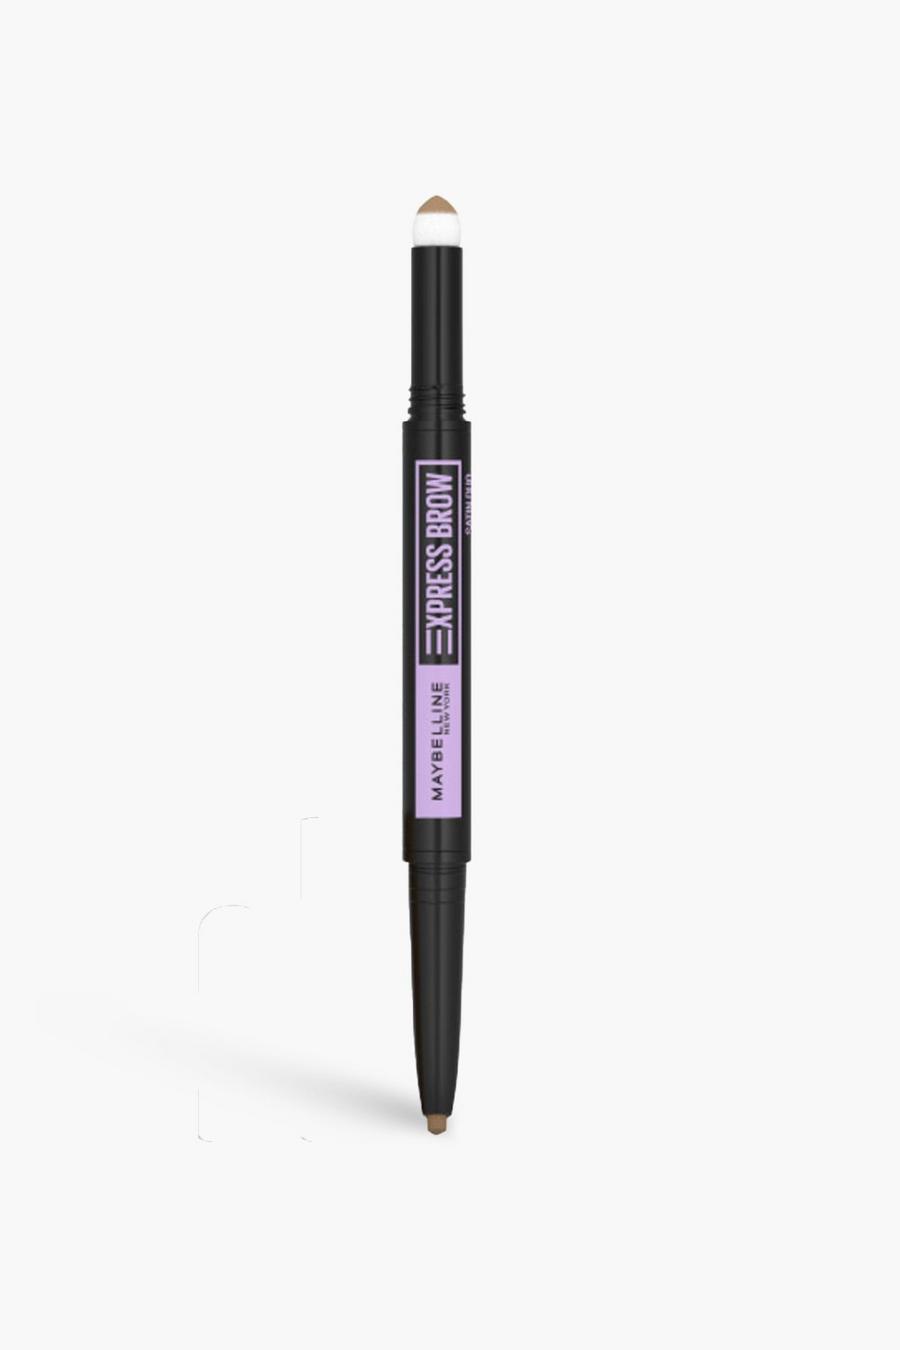 Express Brow Duo - rubio oscuro de Maybelline, Warm blonde beis image number 1